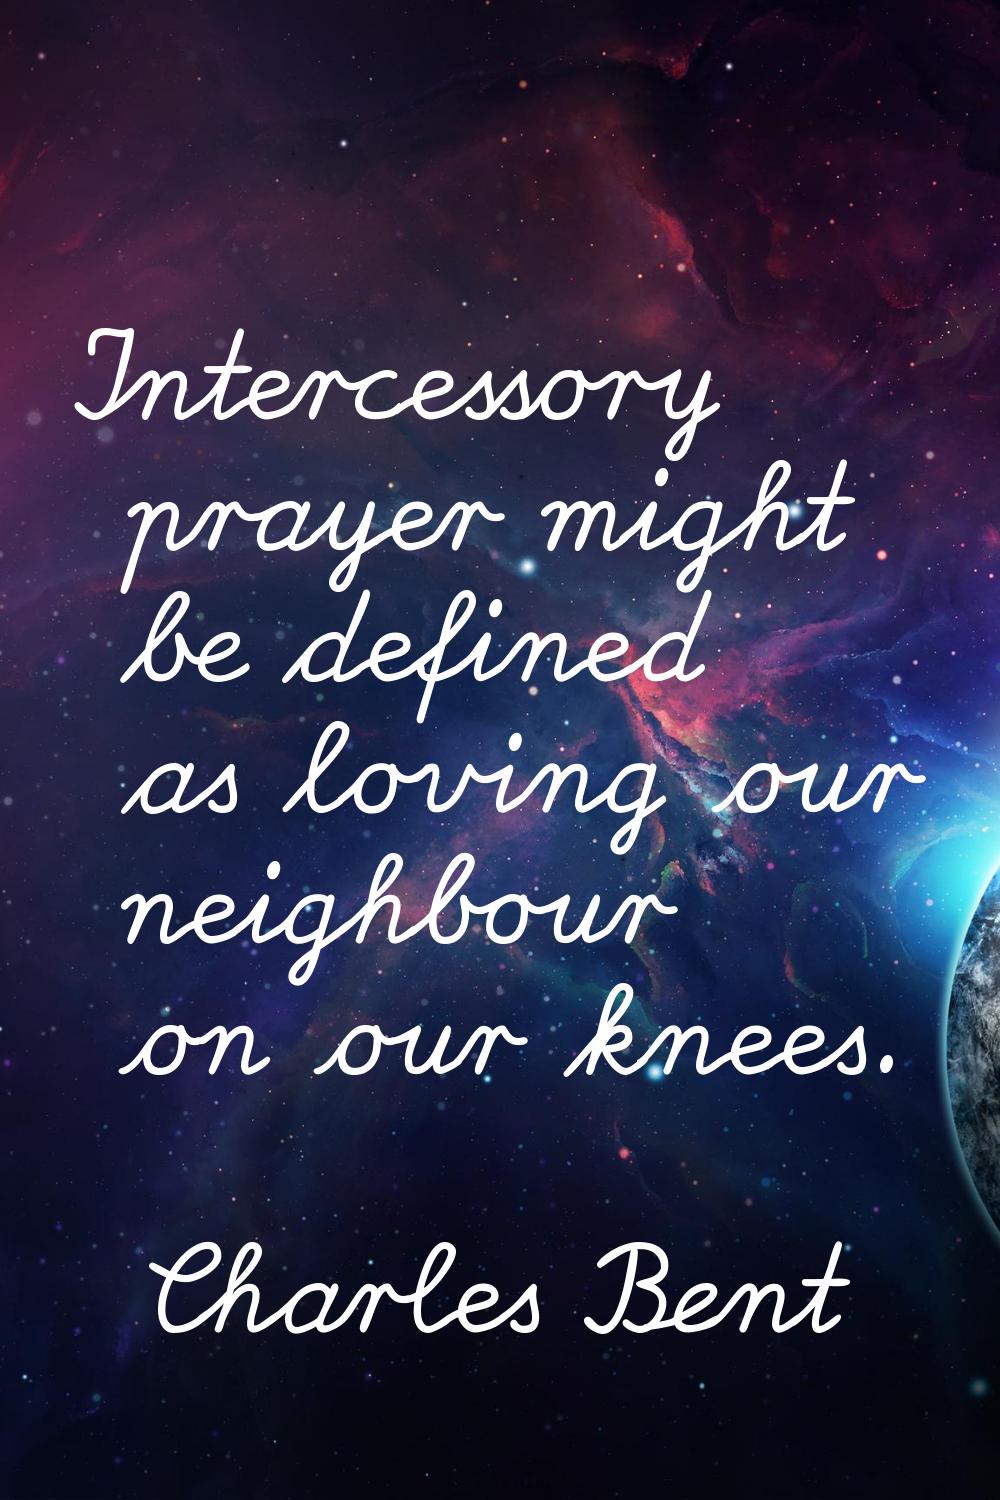 Intercessory prayer might be defined as loving our neighbour on our knees.